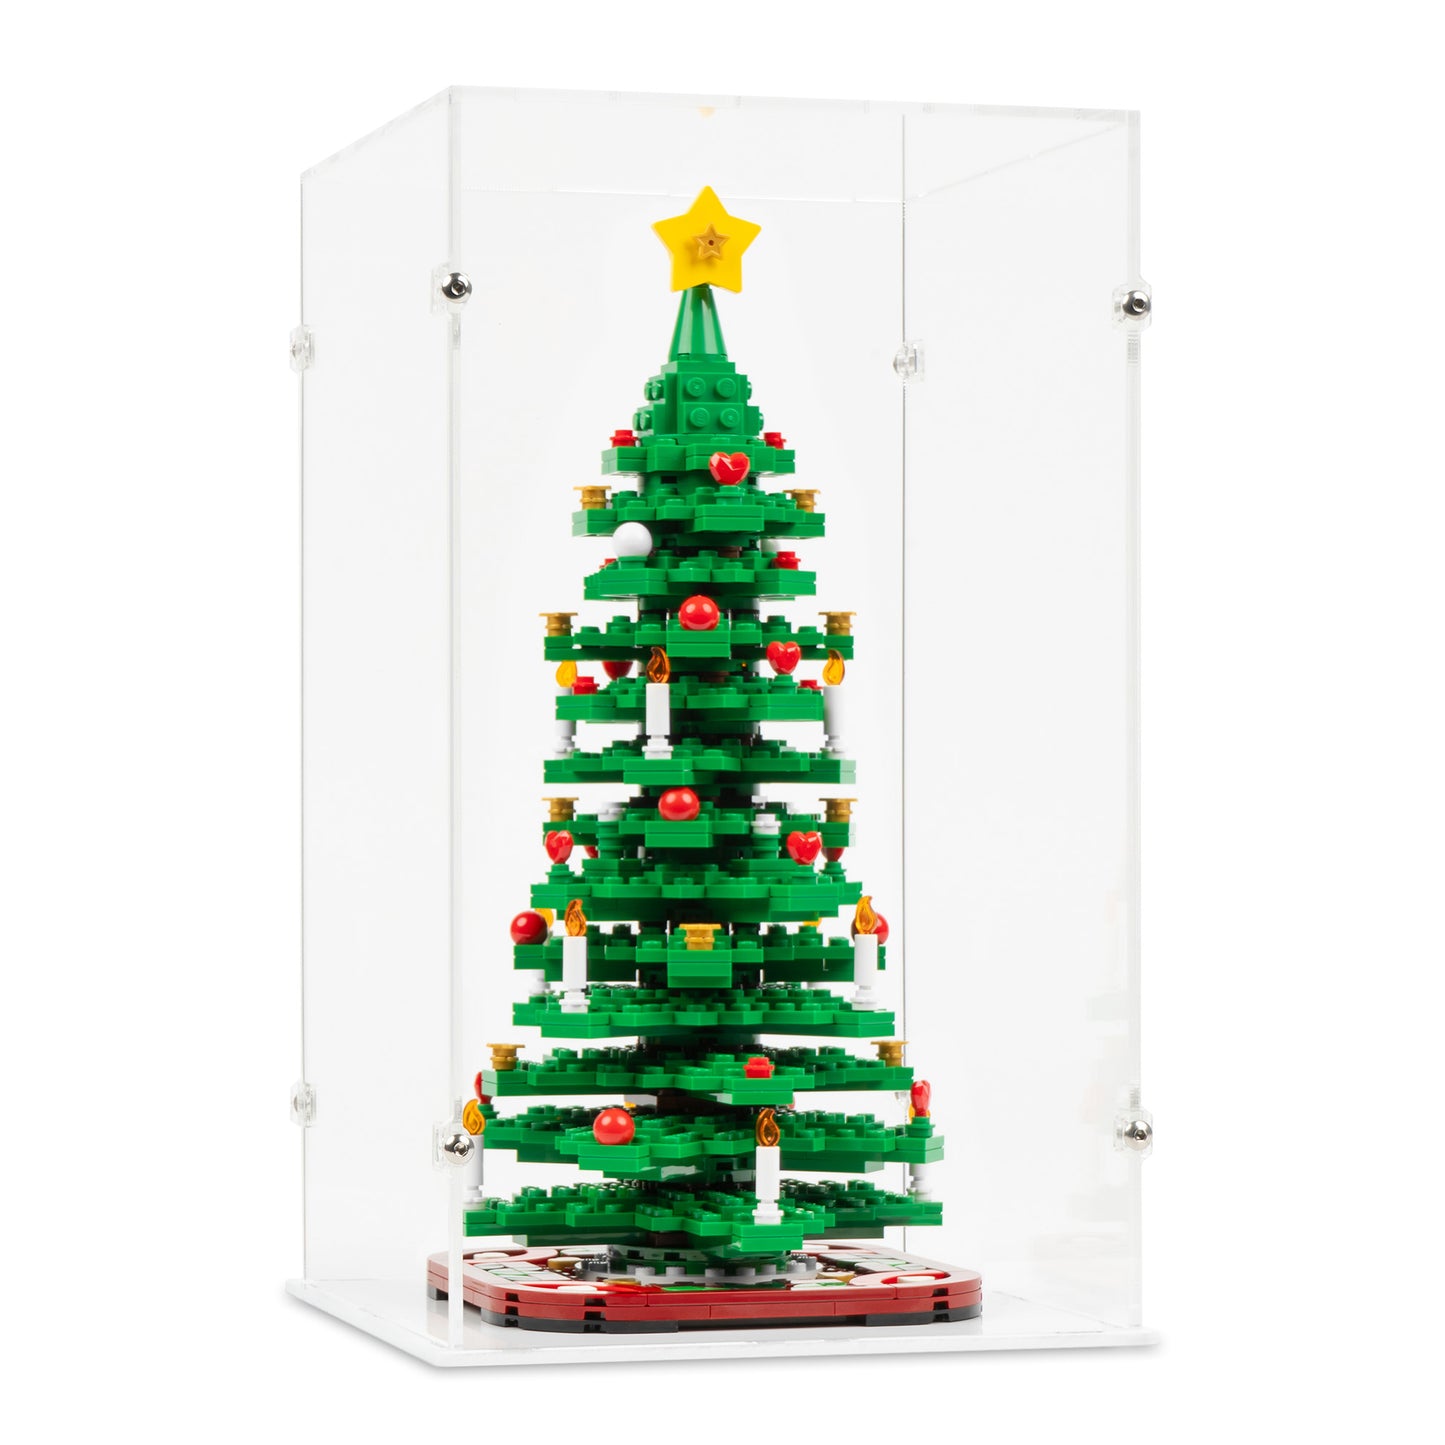 Angled view of LEGO 40573 Christmas Tree Display Case with a white base.